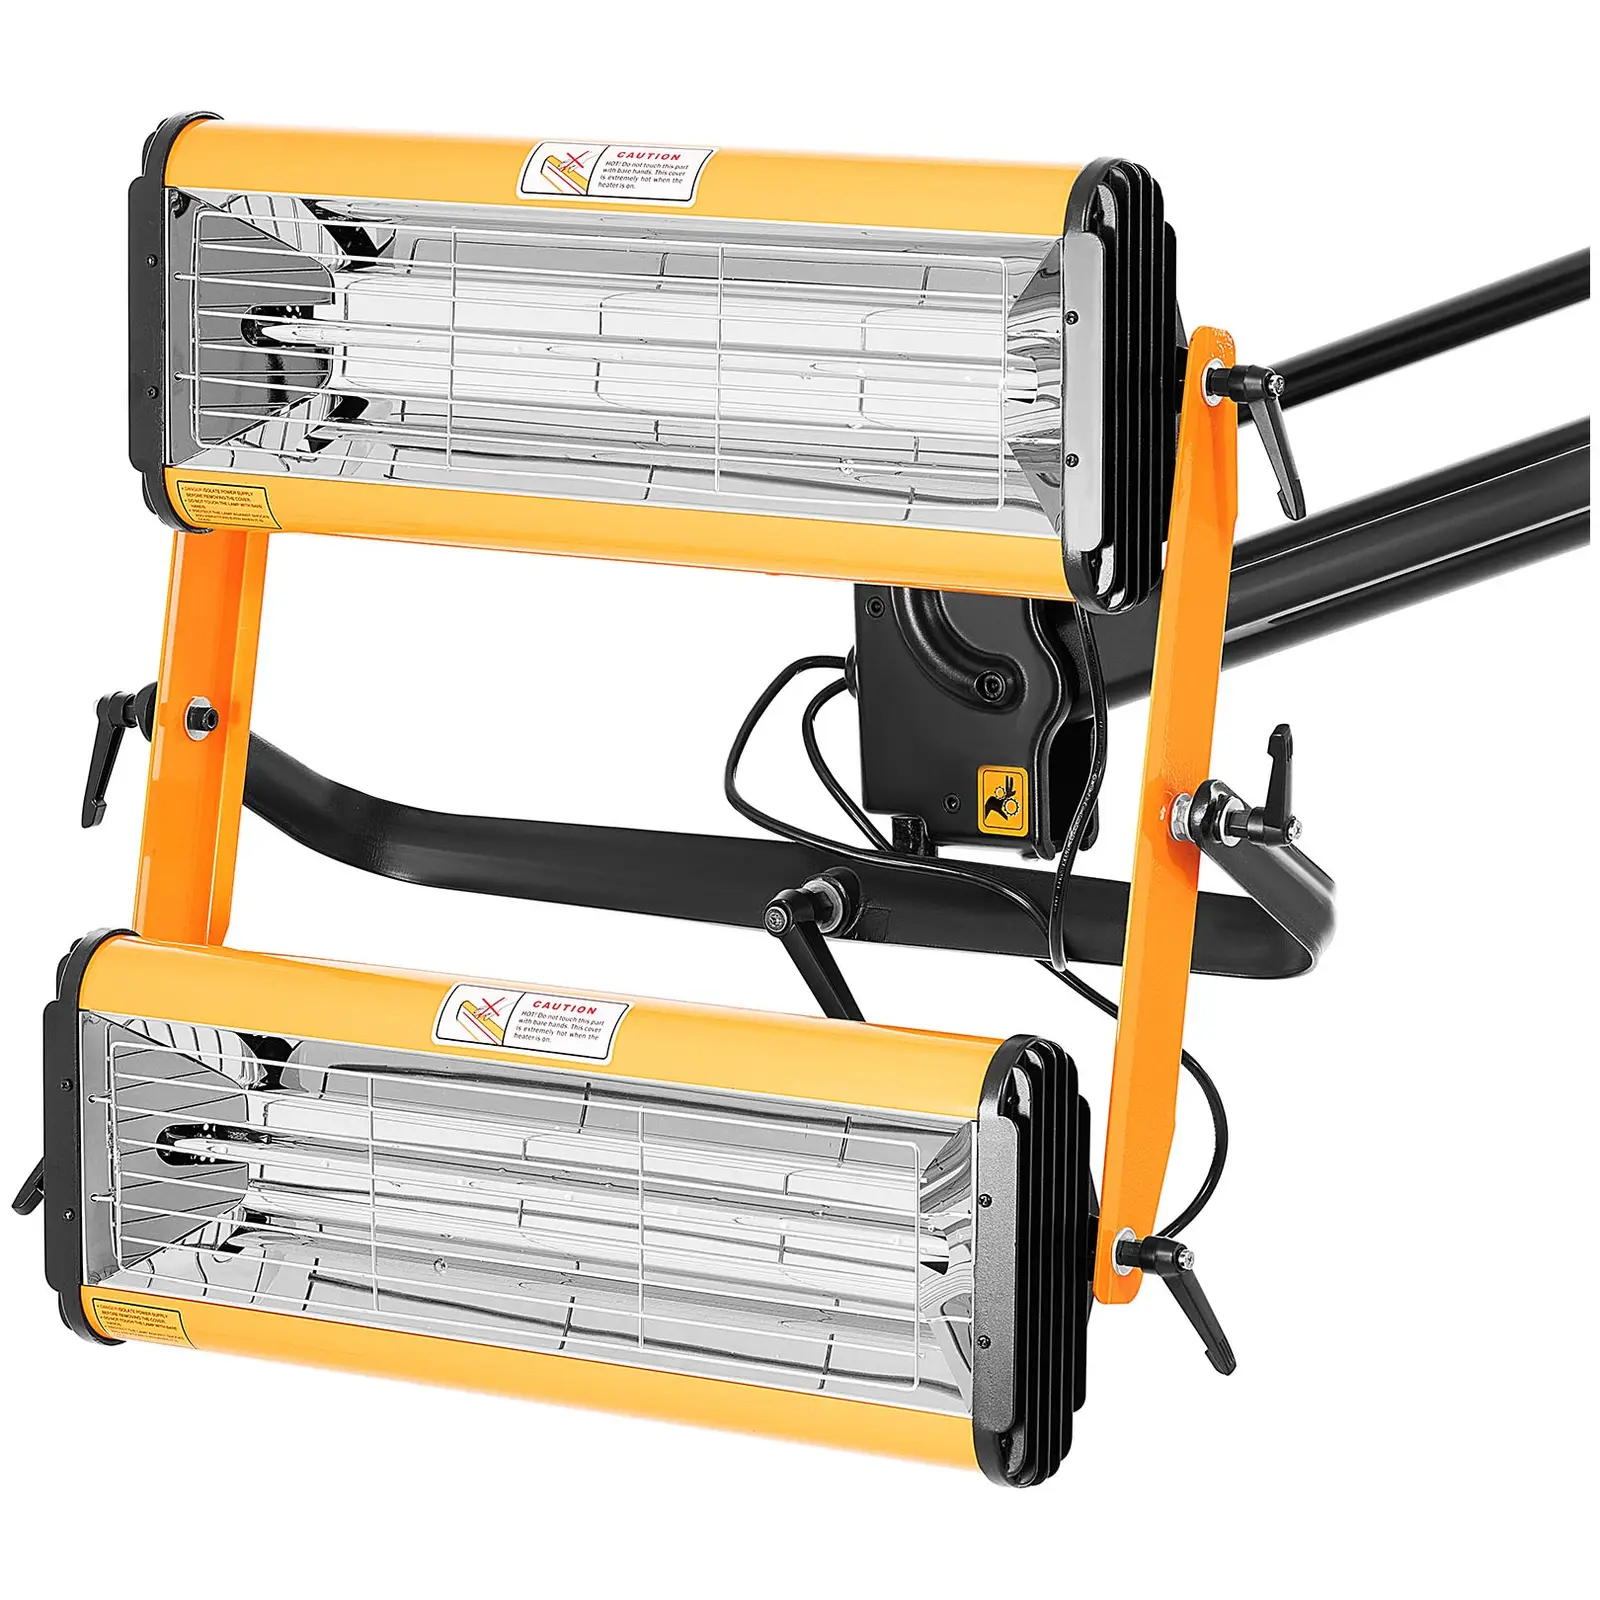 Infrared Curing Lamp - 2 x 1000 W emitters - height: up to 242 cm